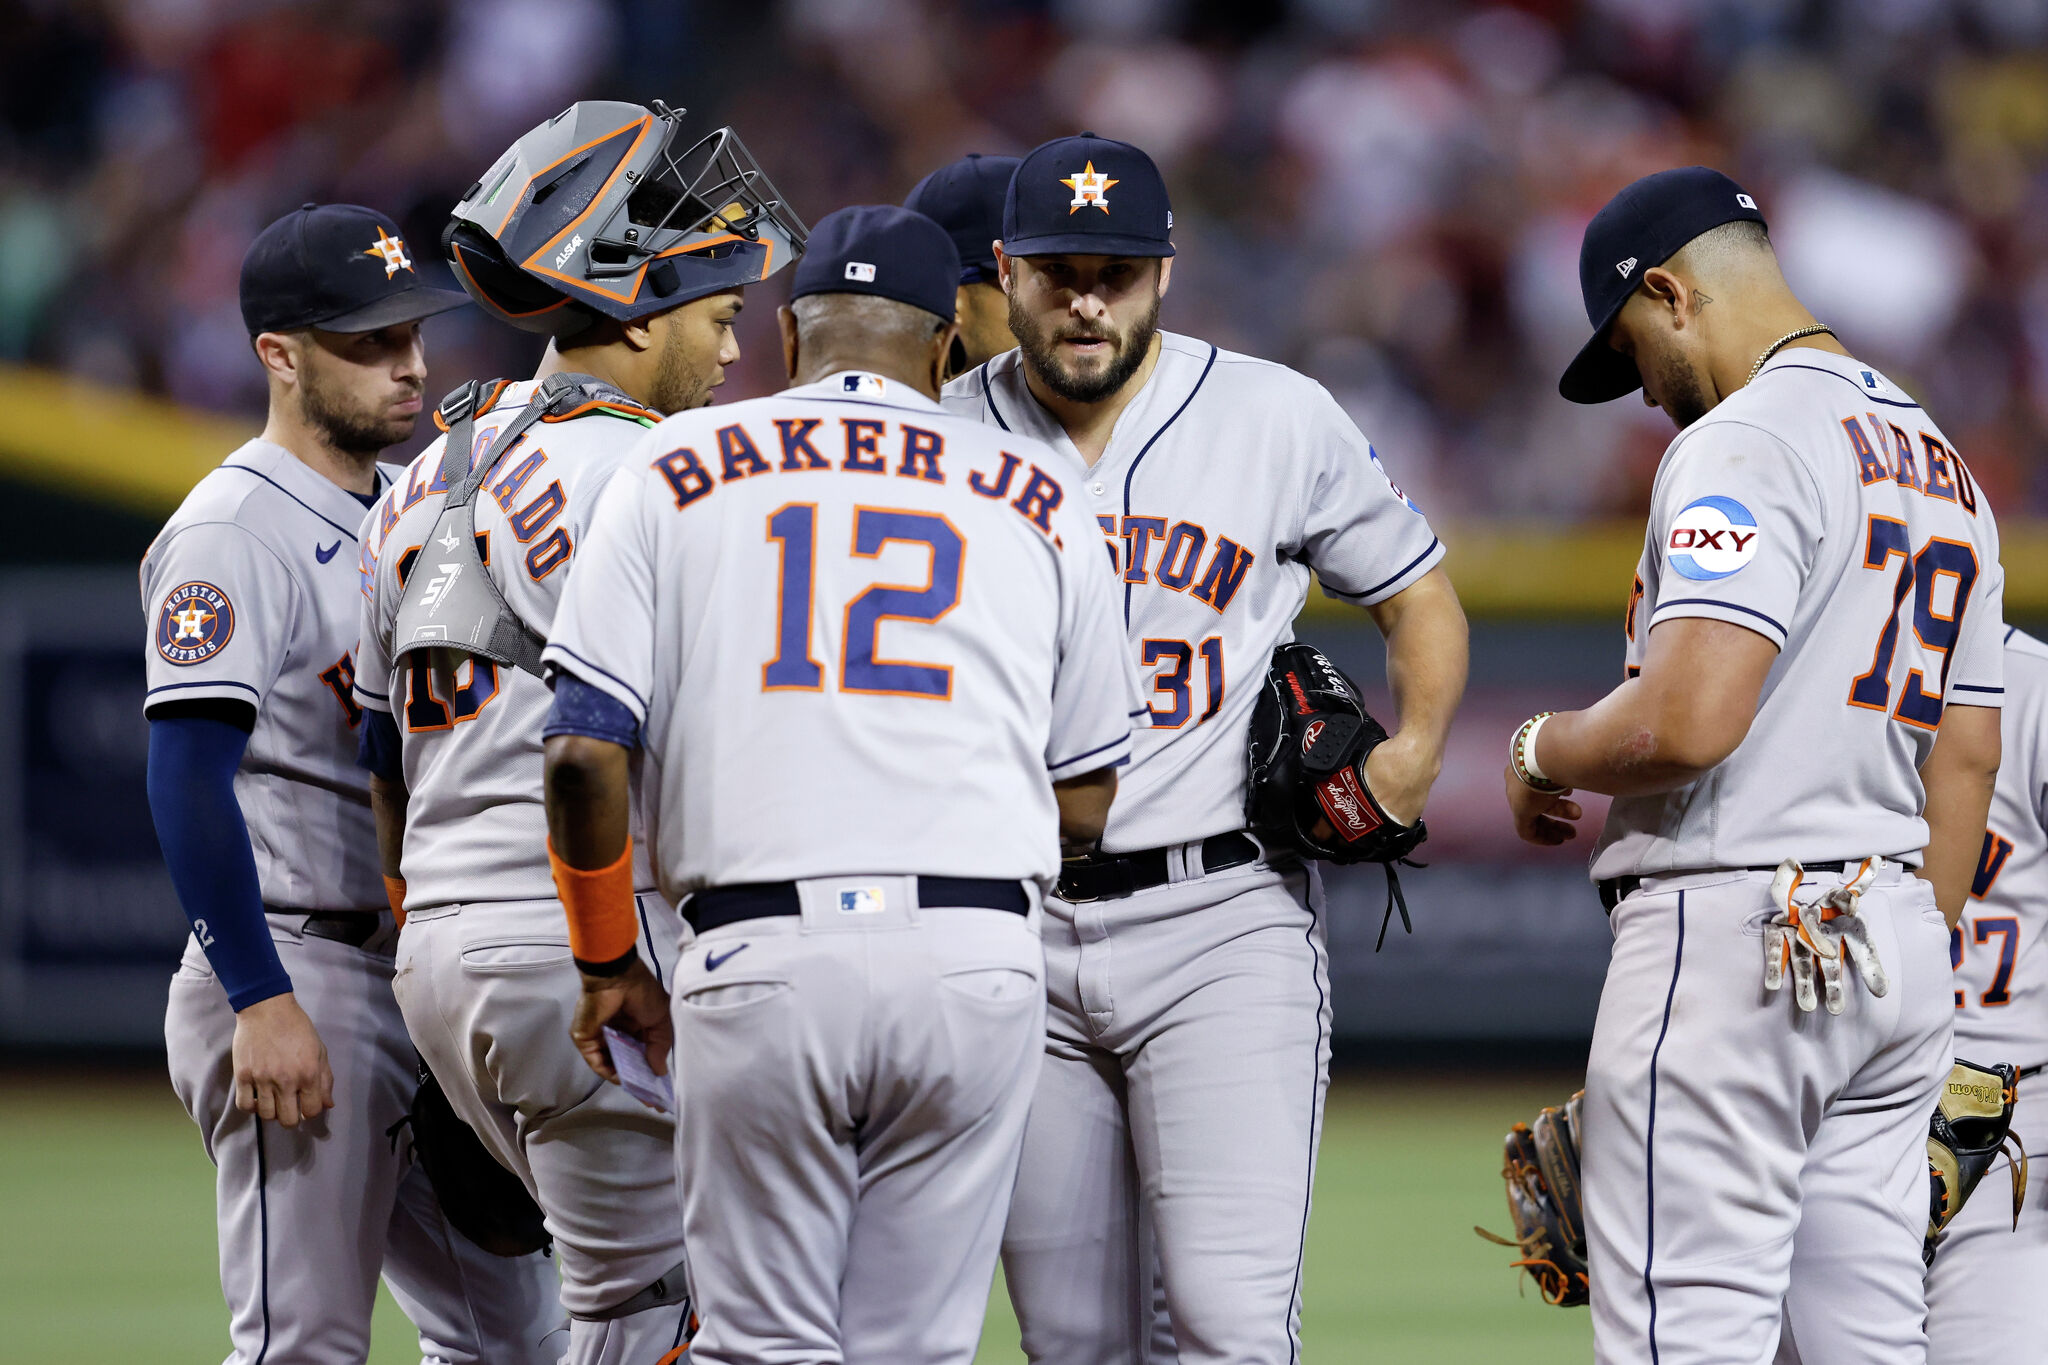 MLB playoffs: How should we feel about the Astros? - Sports